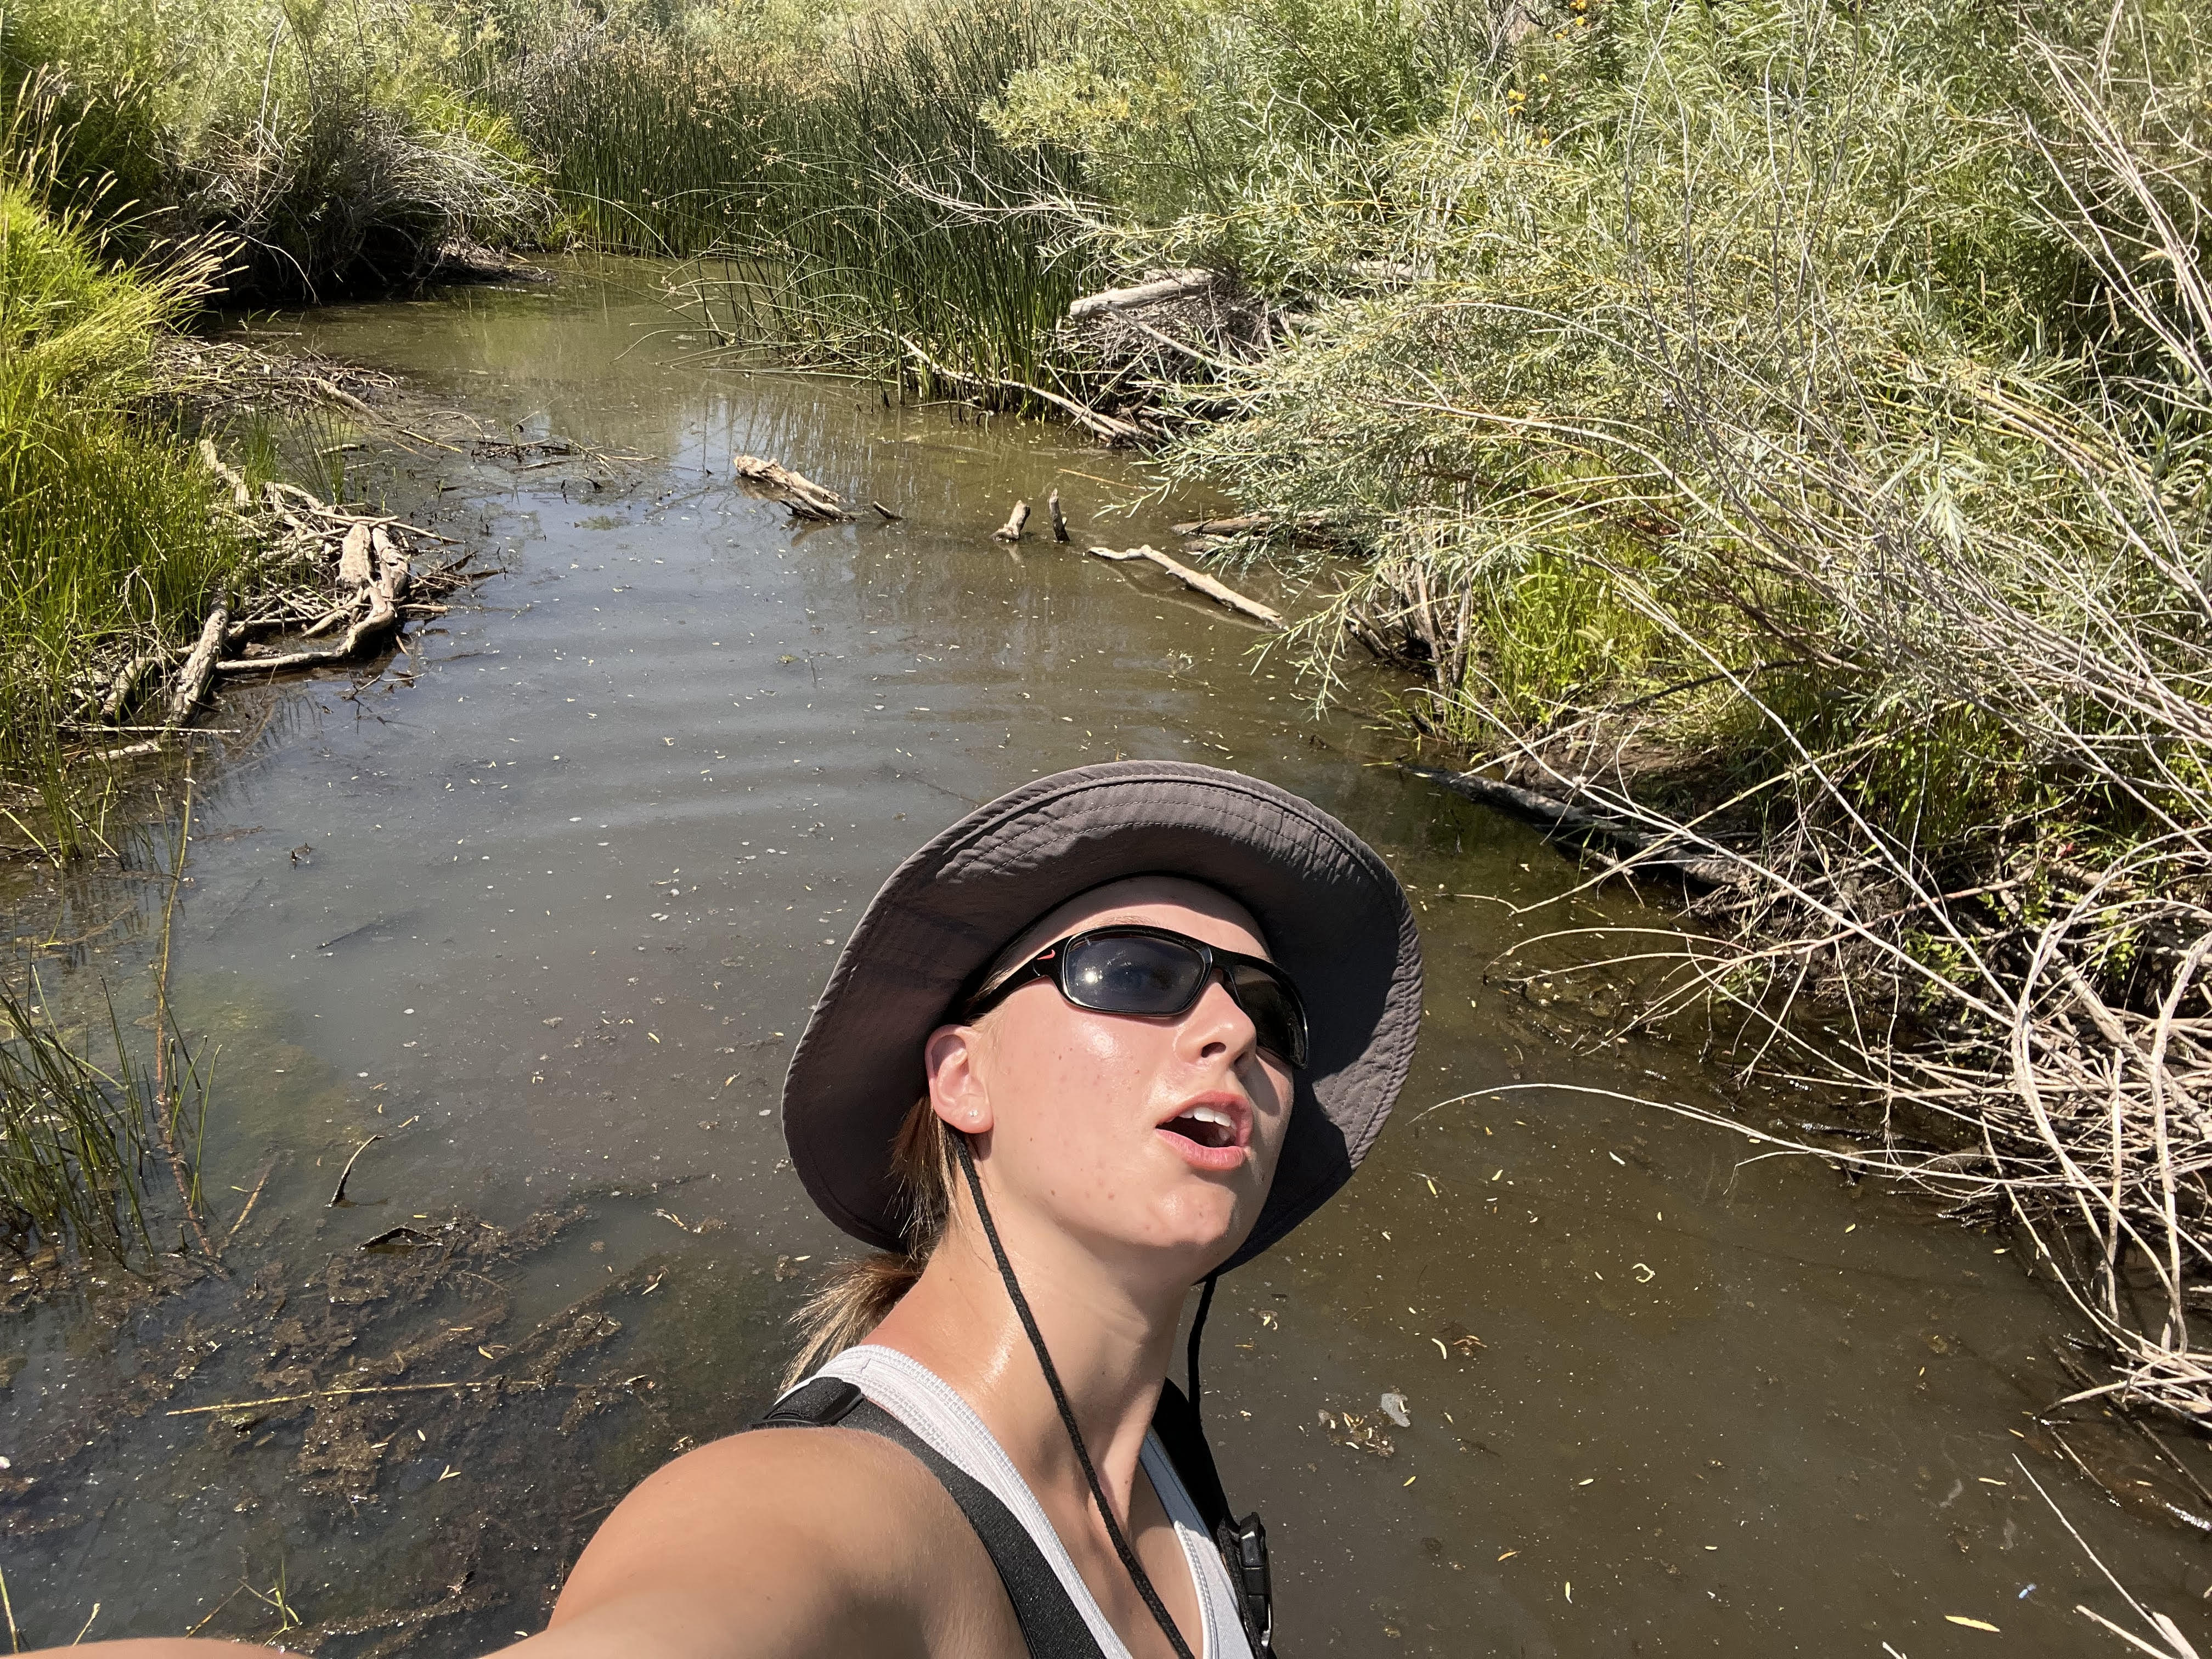 Rebecca taking a selfie while standing in a creek.